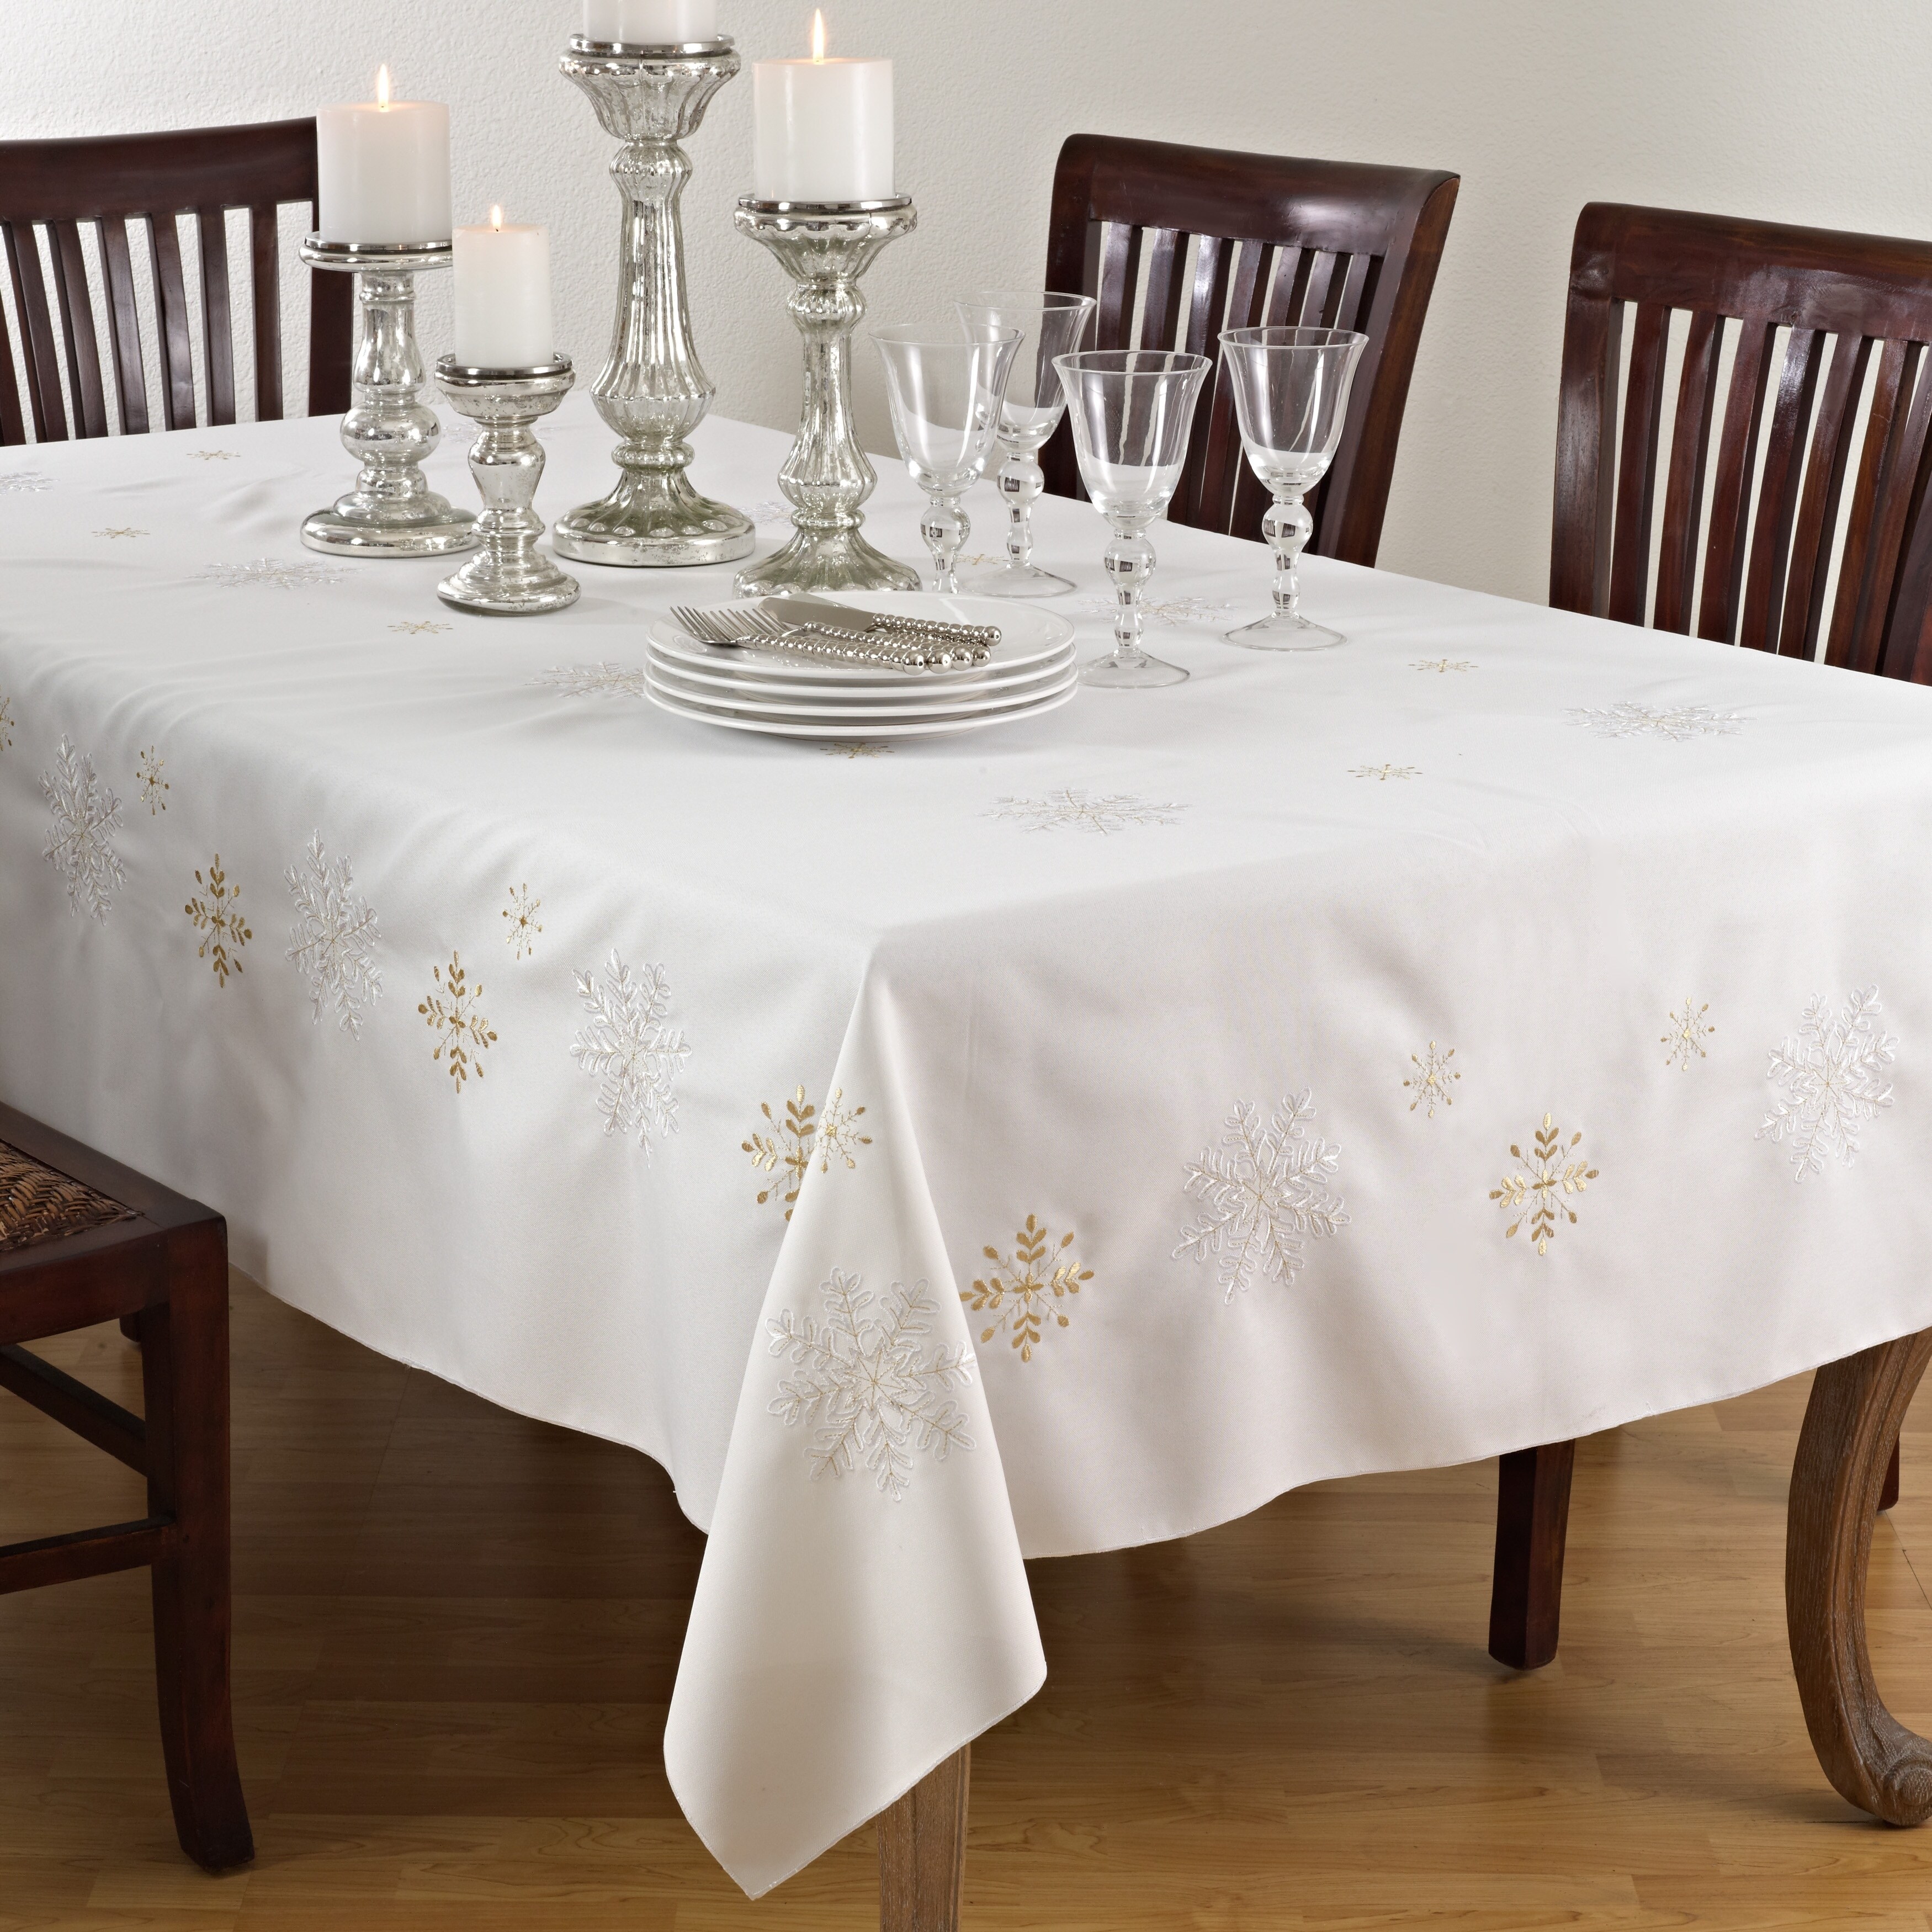 Snowflake Design Tablecloth On Sale Overstock 10287211